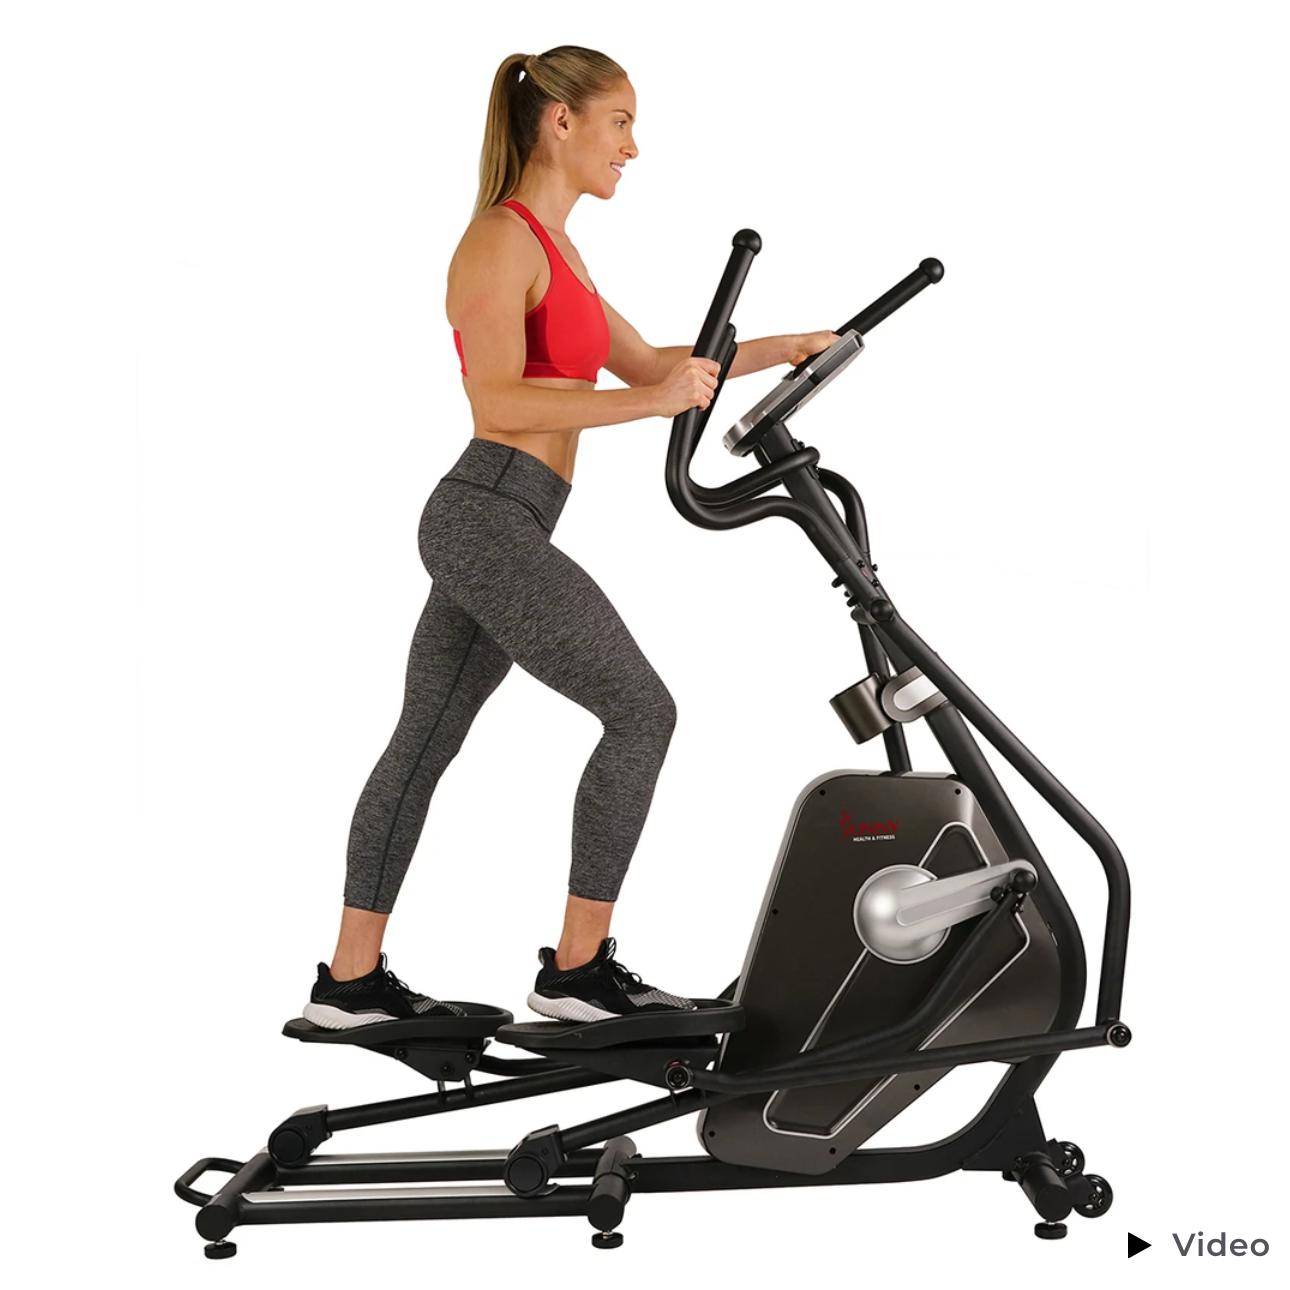 Circuit Zone Elliptical Trainer Machine with Heart Rate Monitoring SF-E3862 Stride